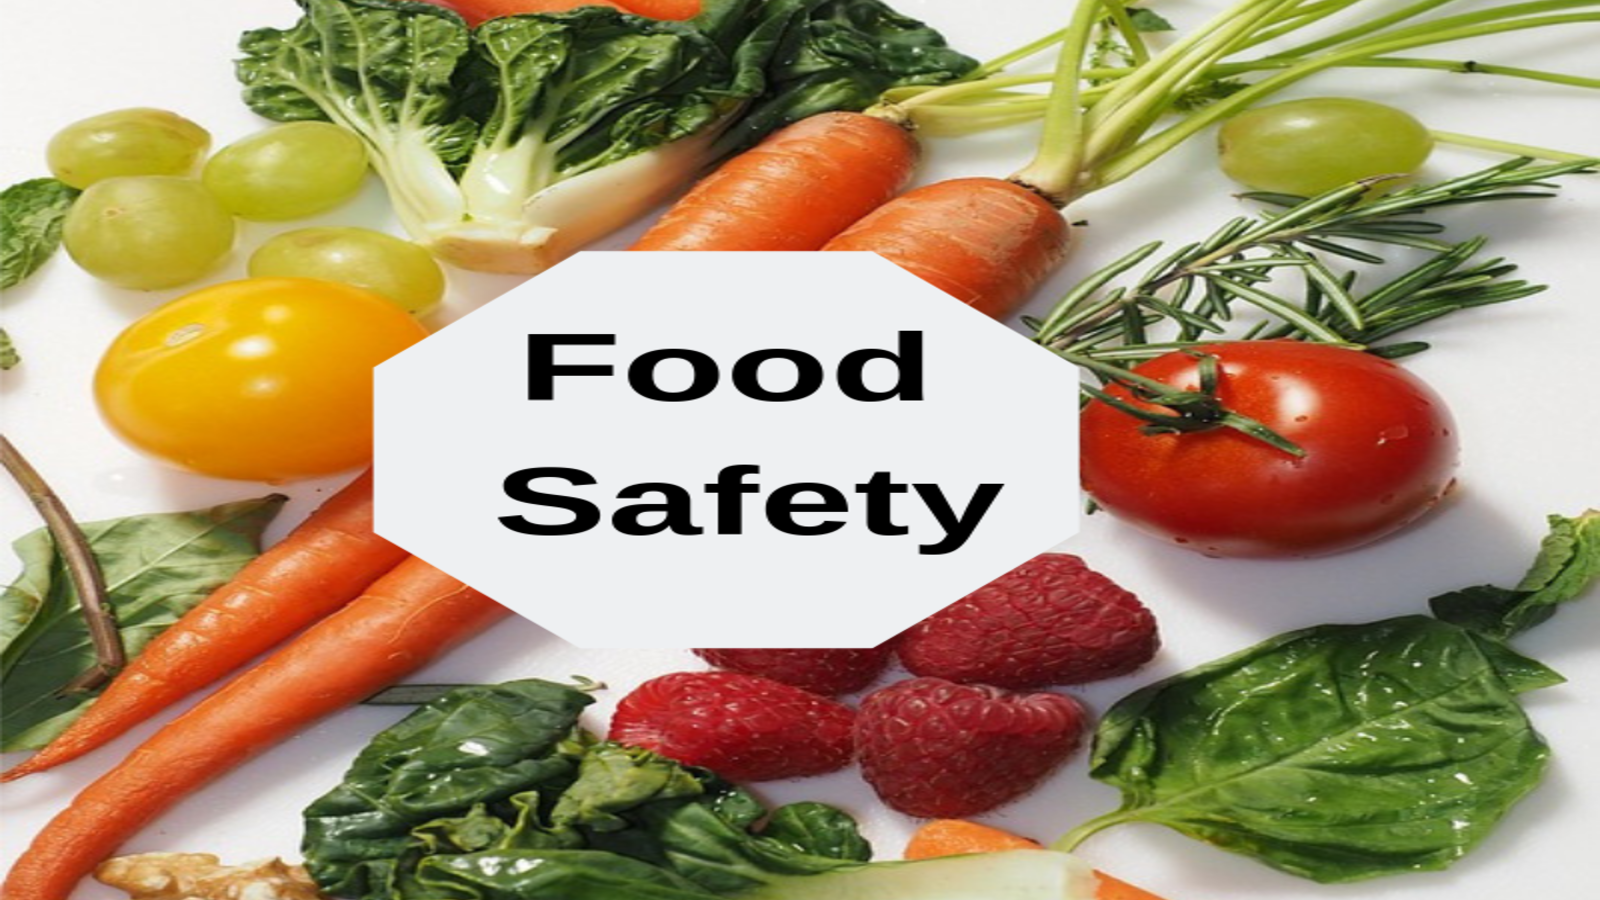 Two-thirds of consumers globally believe that food safety is a major issue for society- Tetra Pak